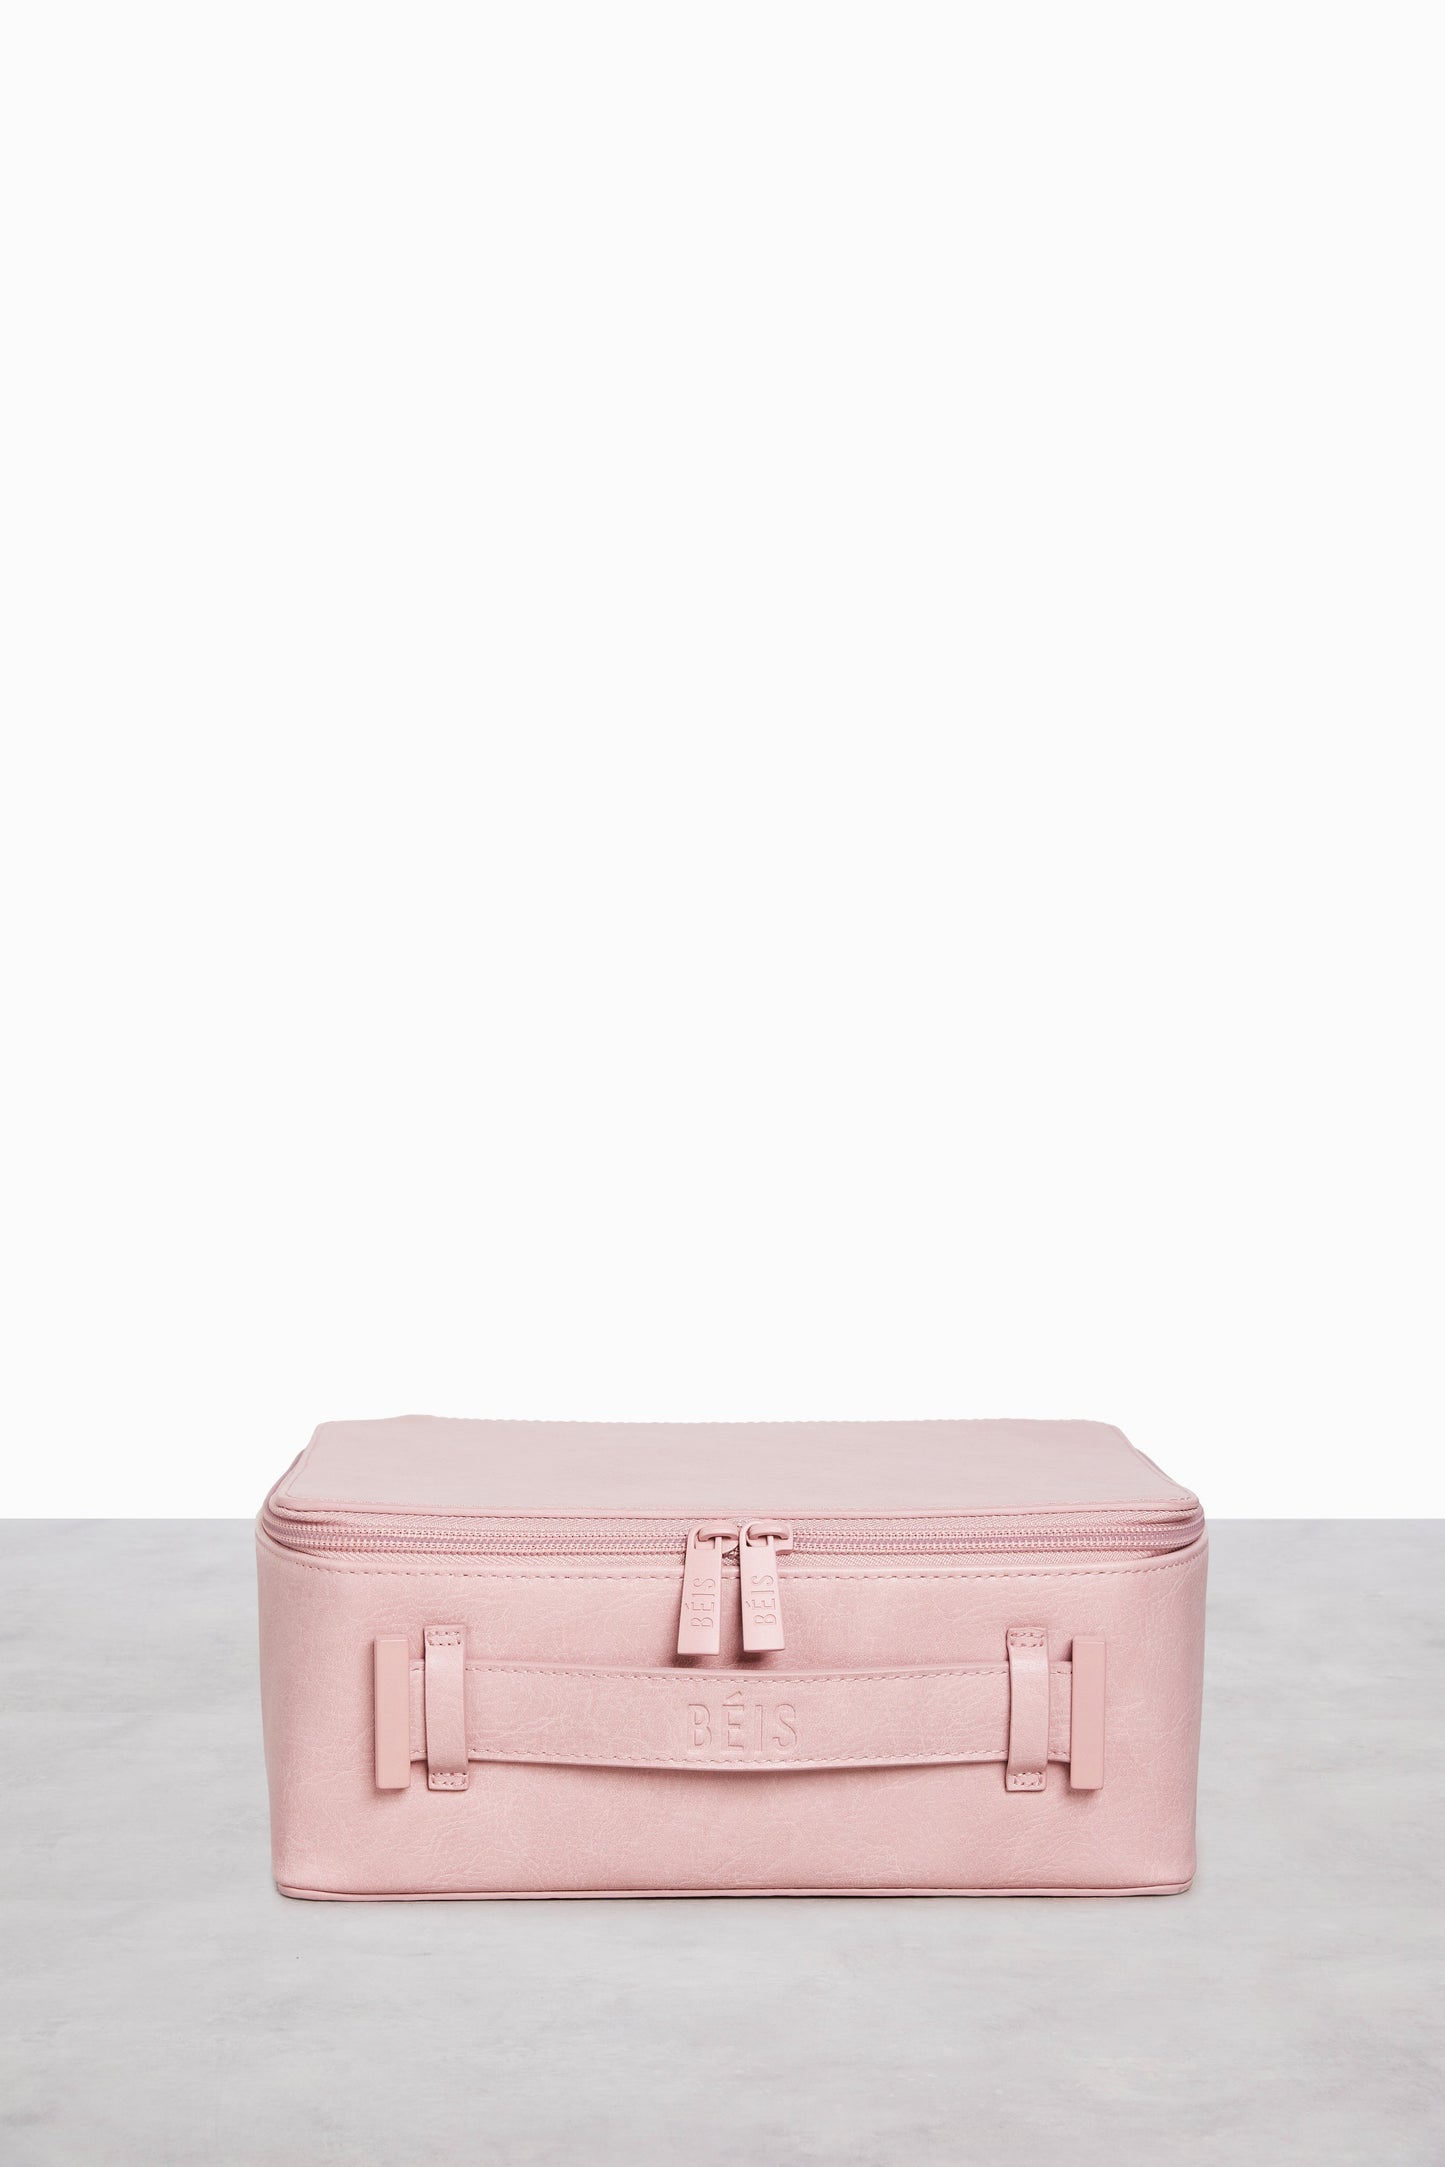 The Cosmetic Case in Atlas Pink